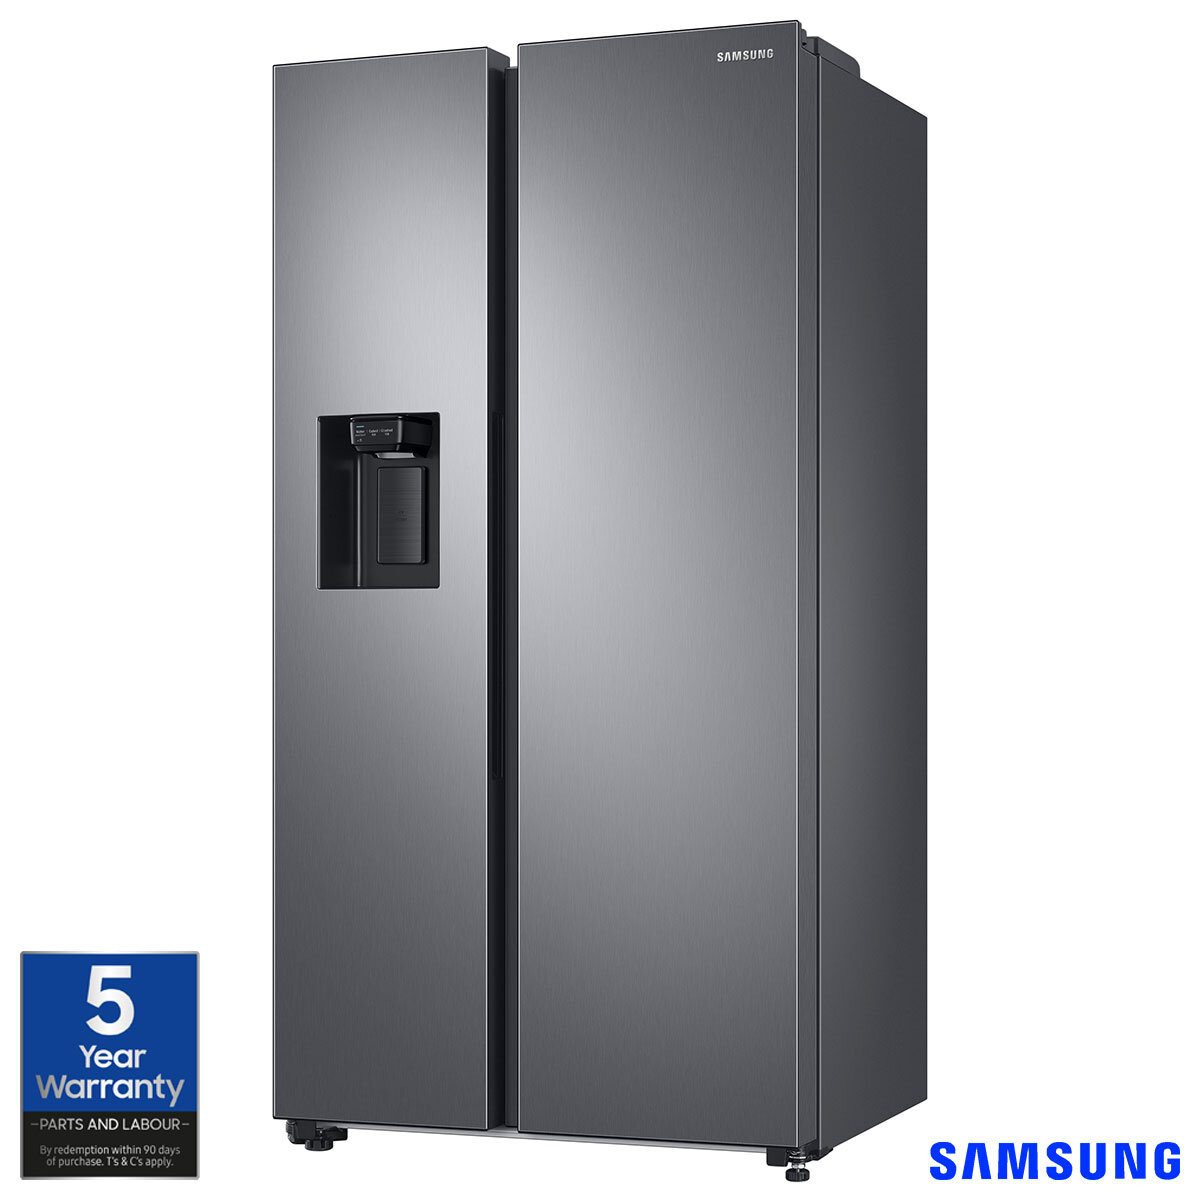 Buy Samsung RS68A8820S9/EU Side by Side, F Rated in Silver at Costco.co.uk